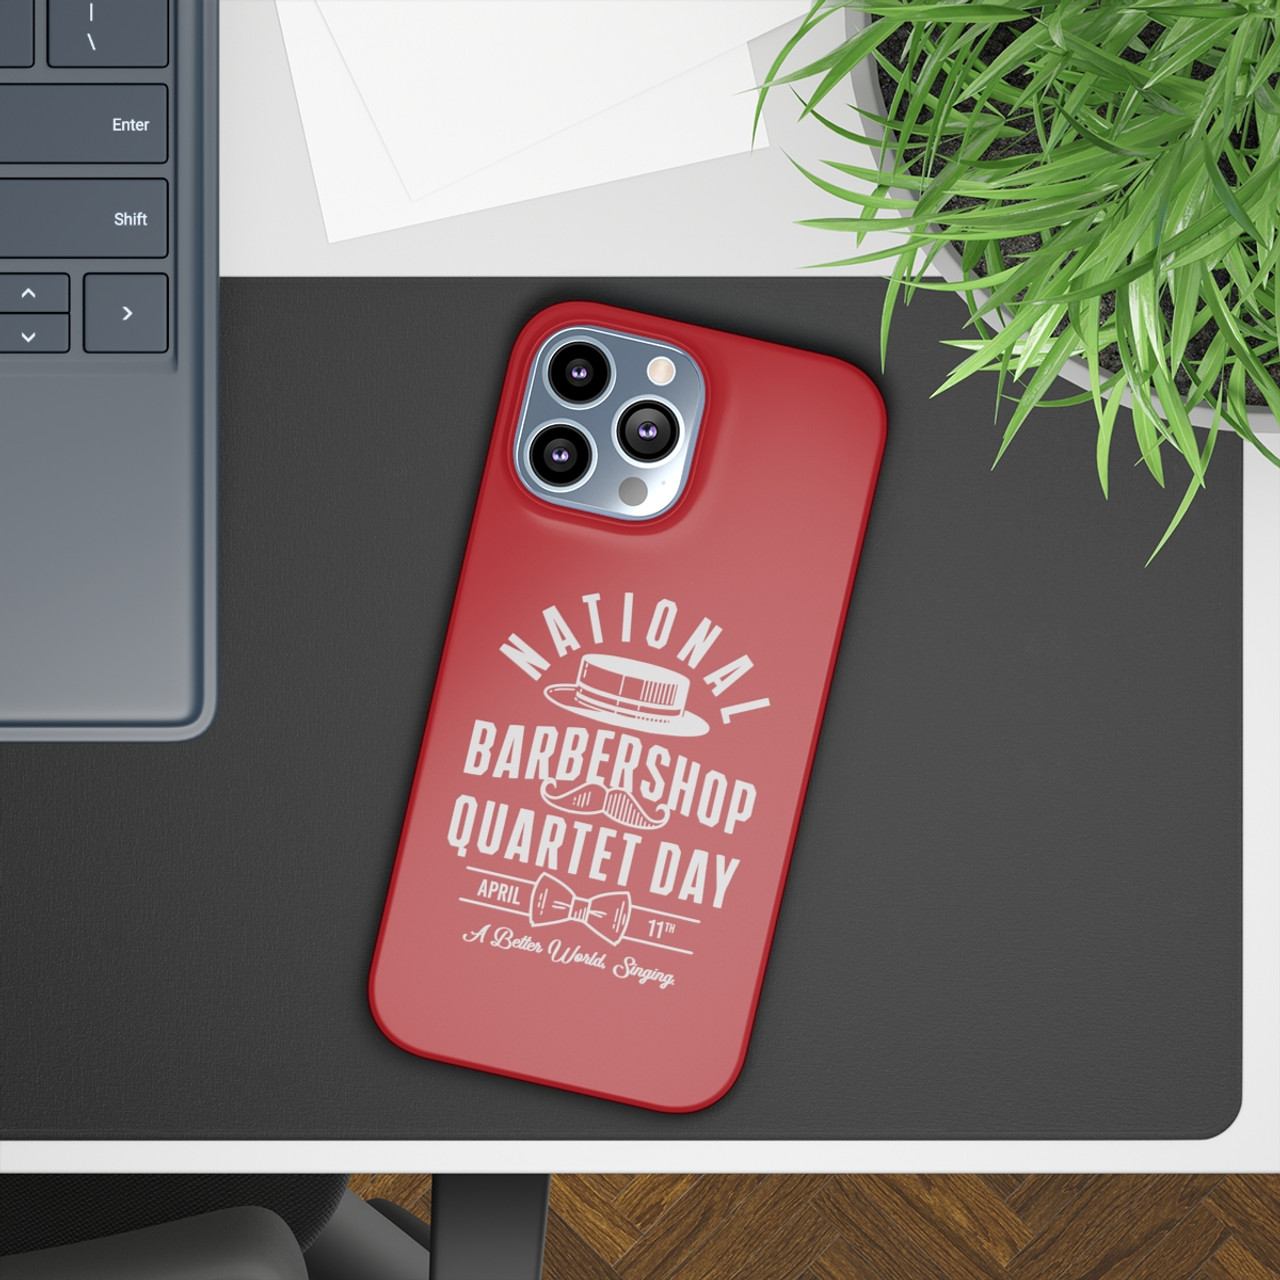 National Barbershop Quartet Day Slim Cases for iPhone and Samsung Galaxy- Red